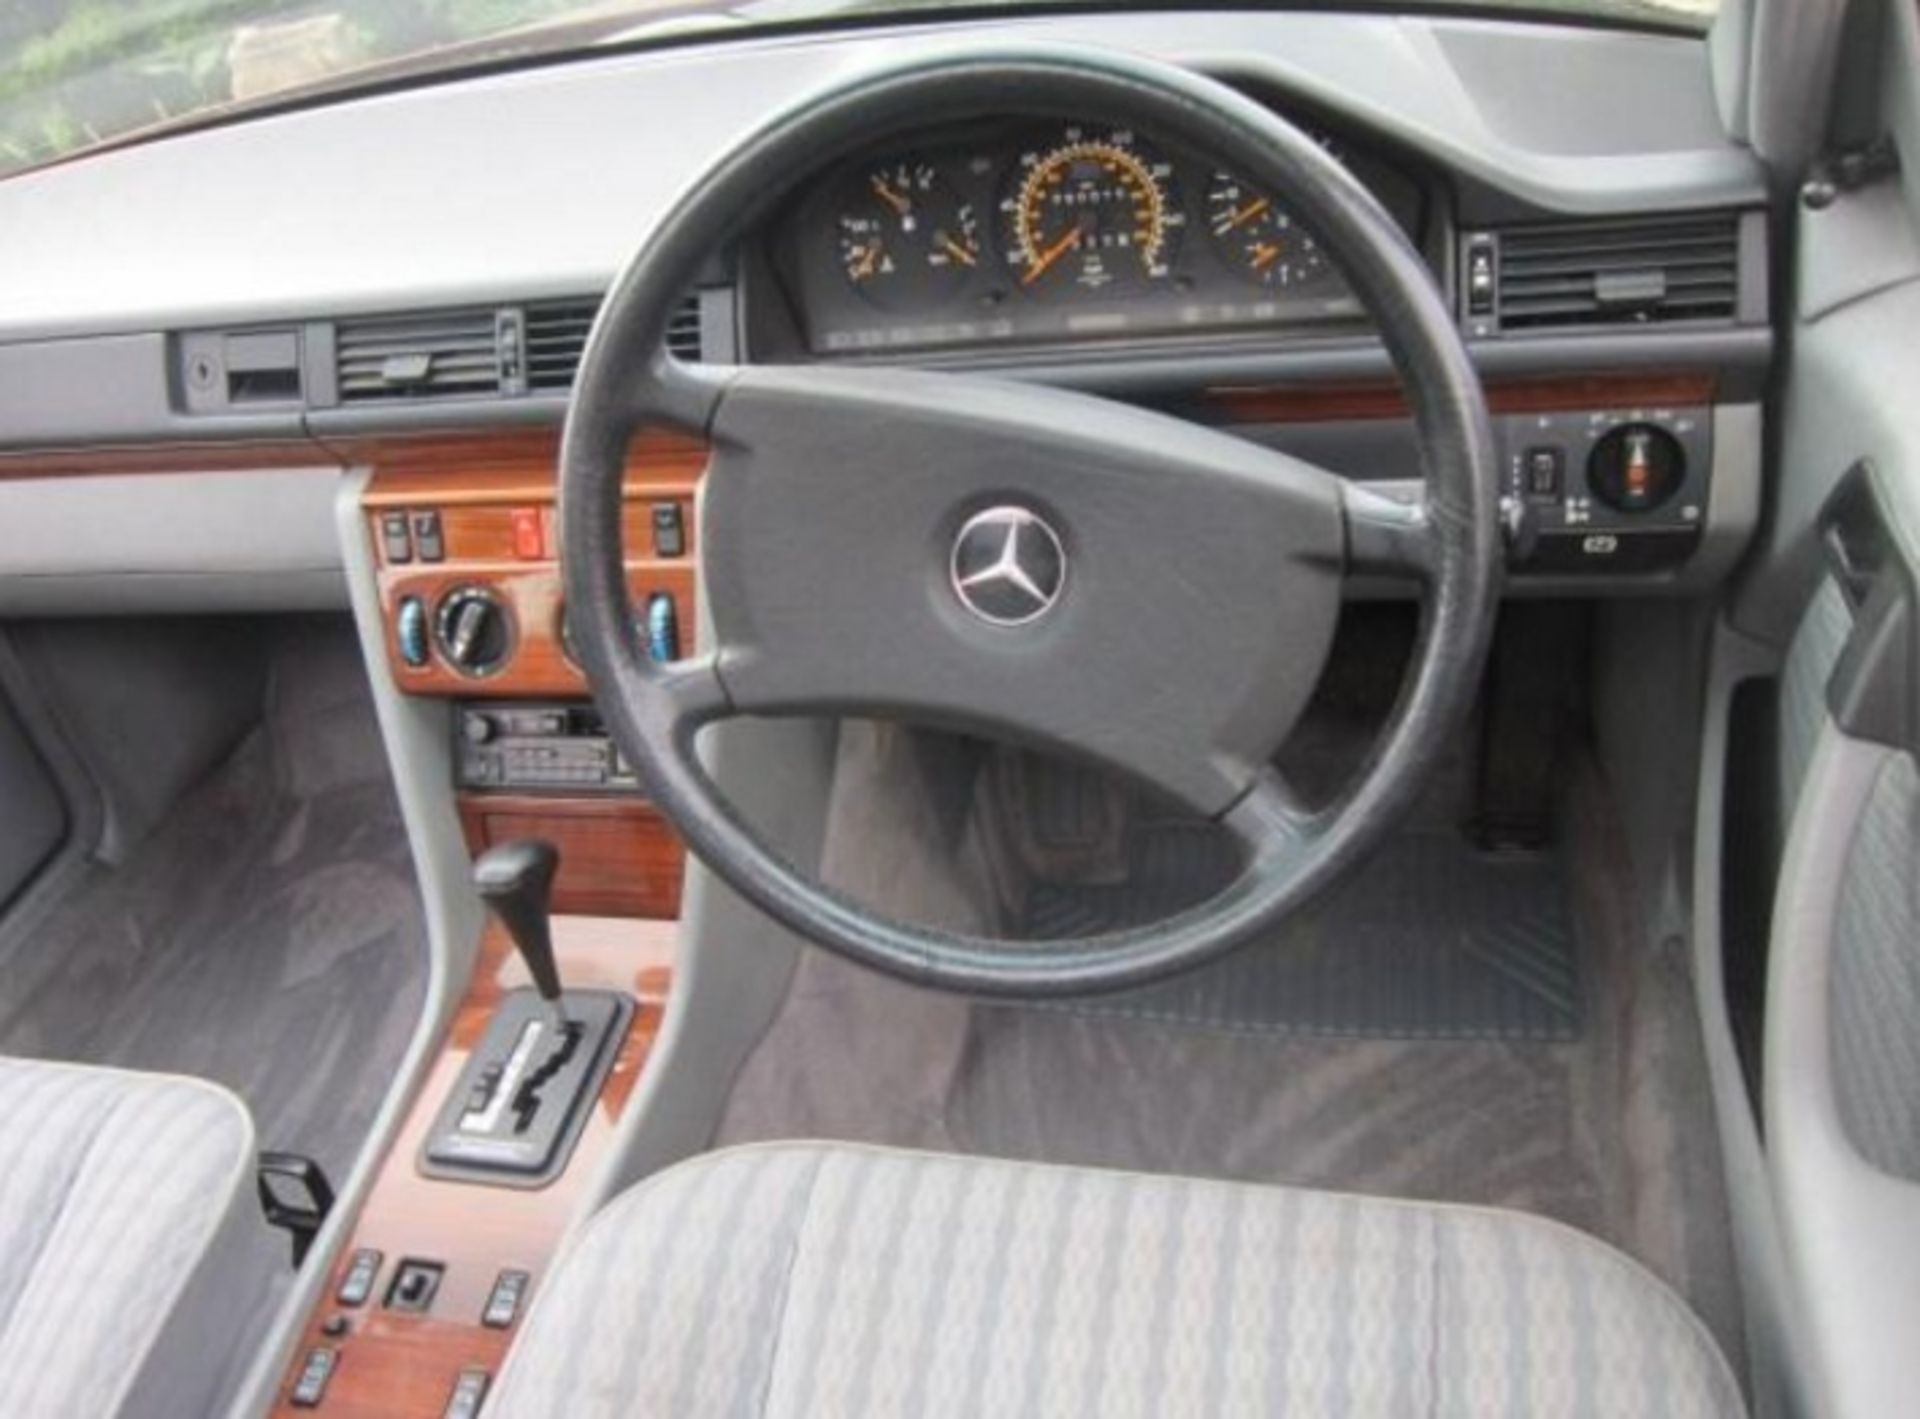 1980 Mercedes-Benz 300 E – 4 Matic (4WD) (Metallic Ruby Red) - Image 10 of 14